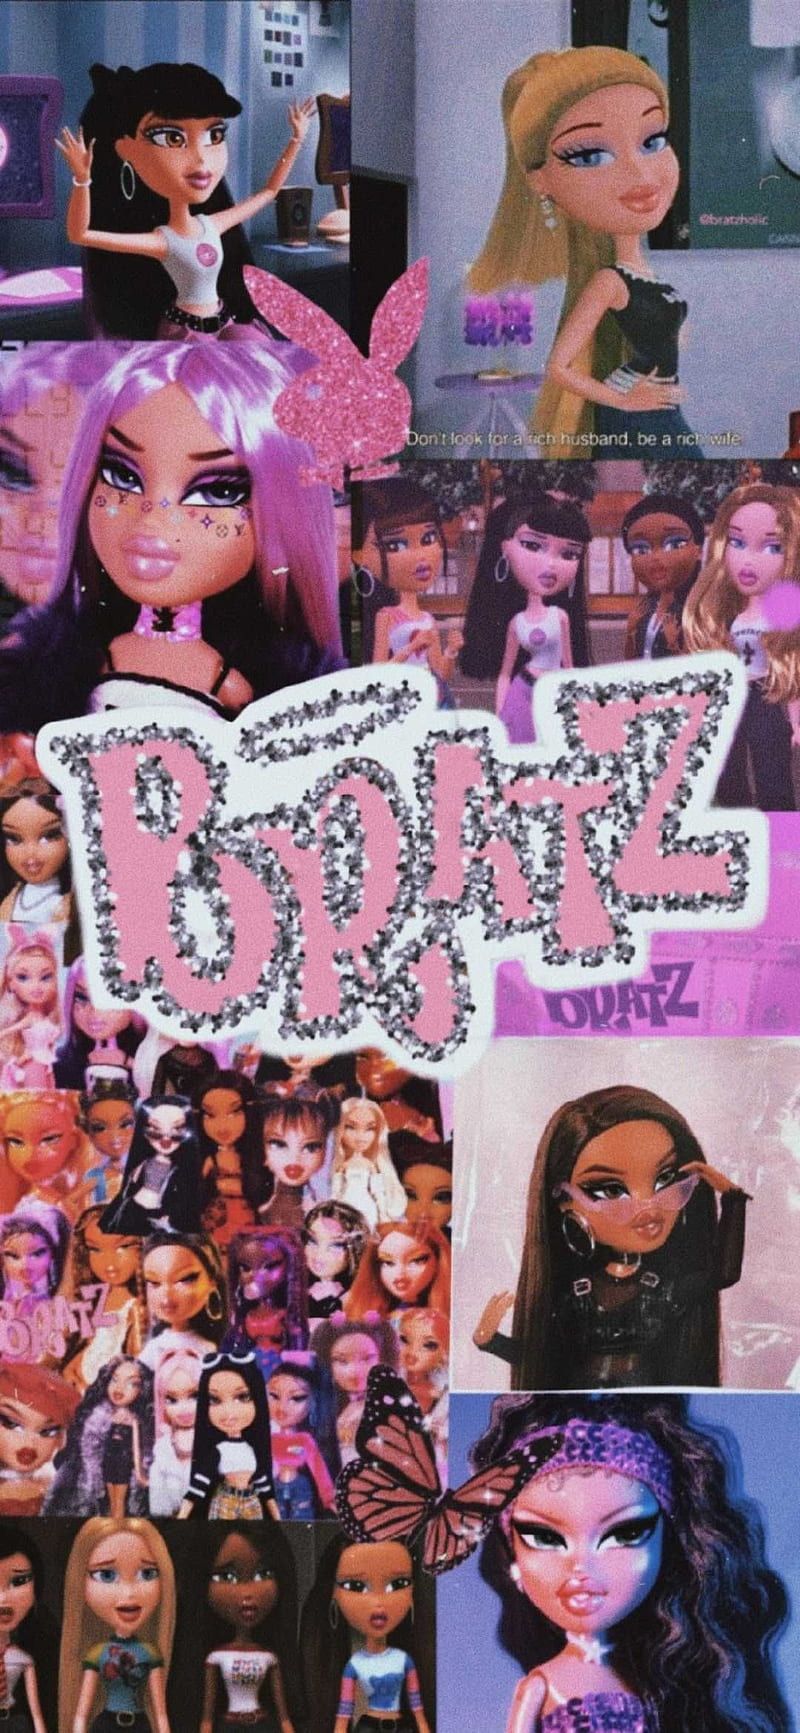 A collage of Bratz dolls in a pink and purple aesthetic - Bratz